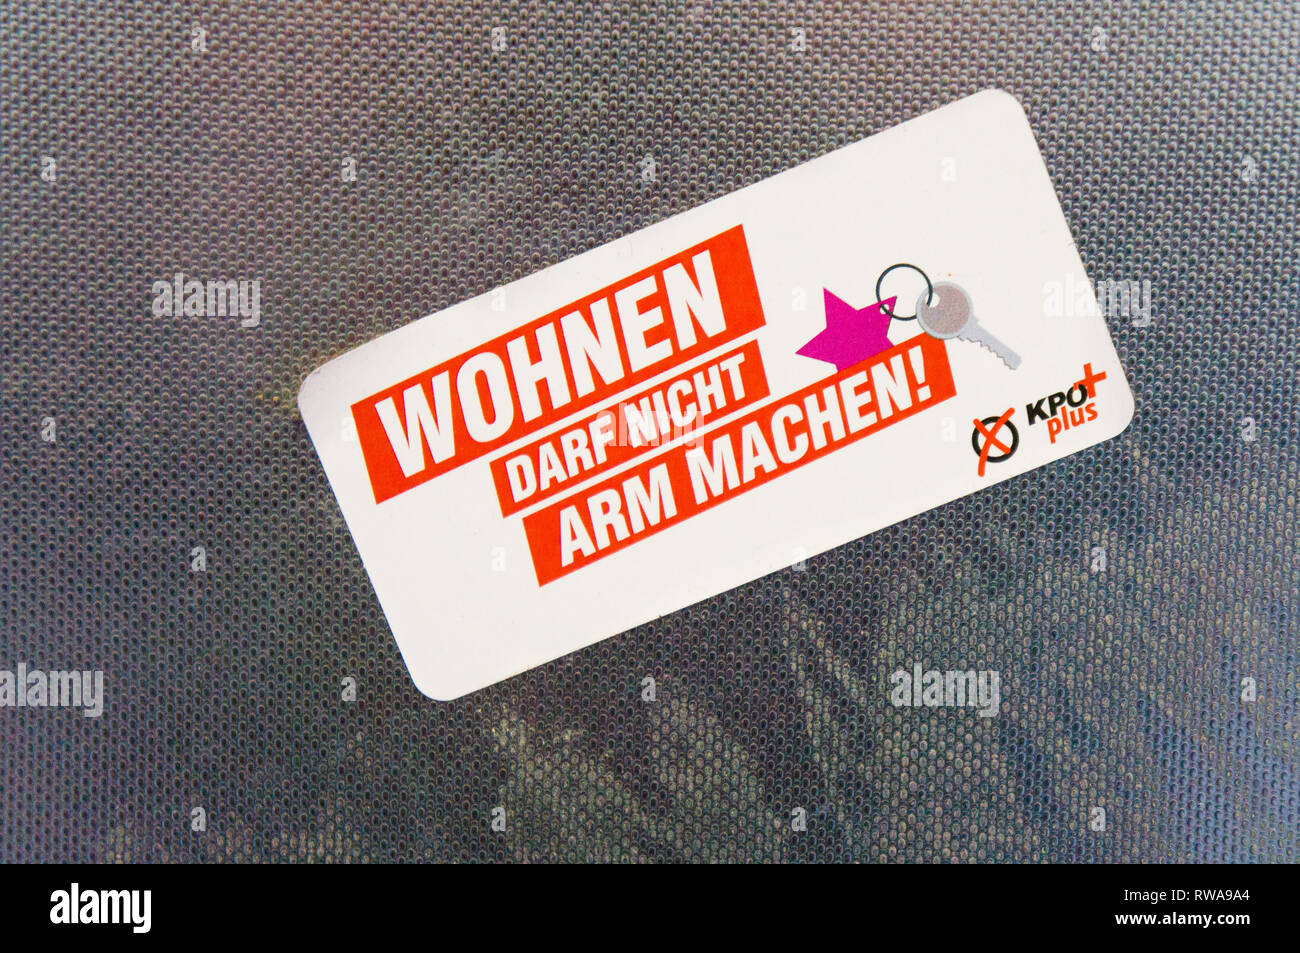 The WOHNEN DARF NICHT ARM MACHEN!, sticker, KPO Plus (KPO+), electoral alliance between the Communist Party of Austria and the Young Greens, in Vienna Stock Photo